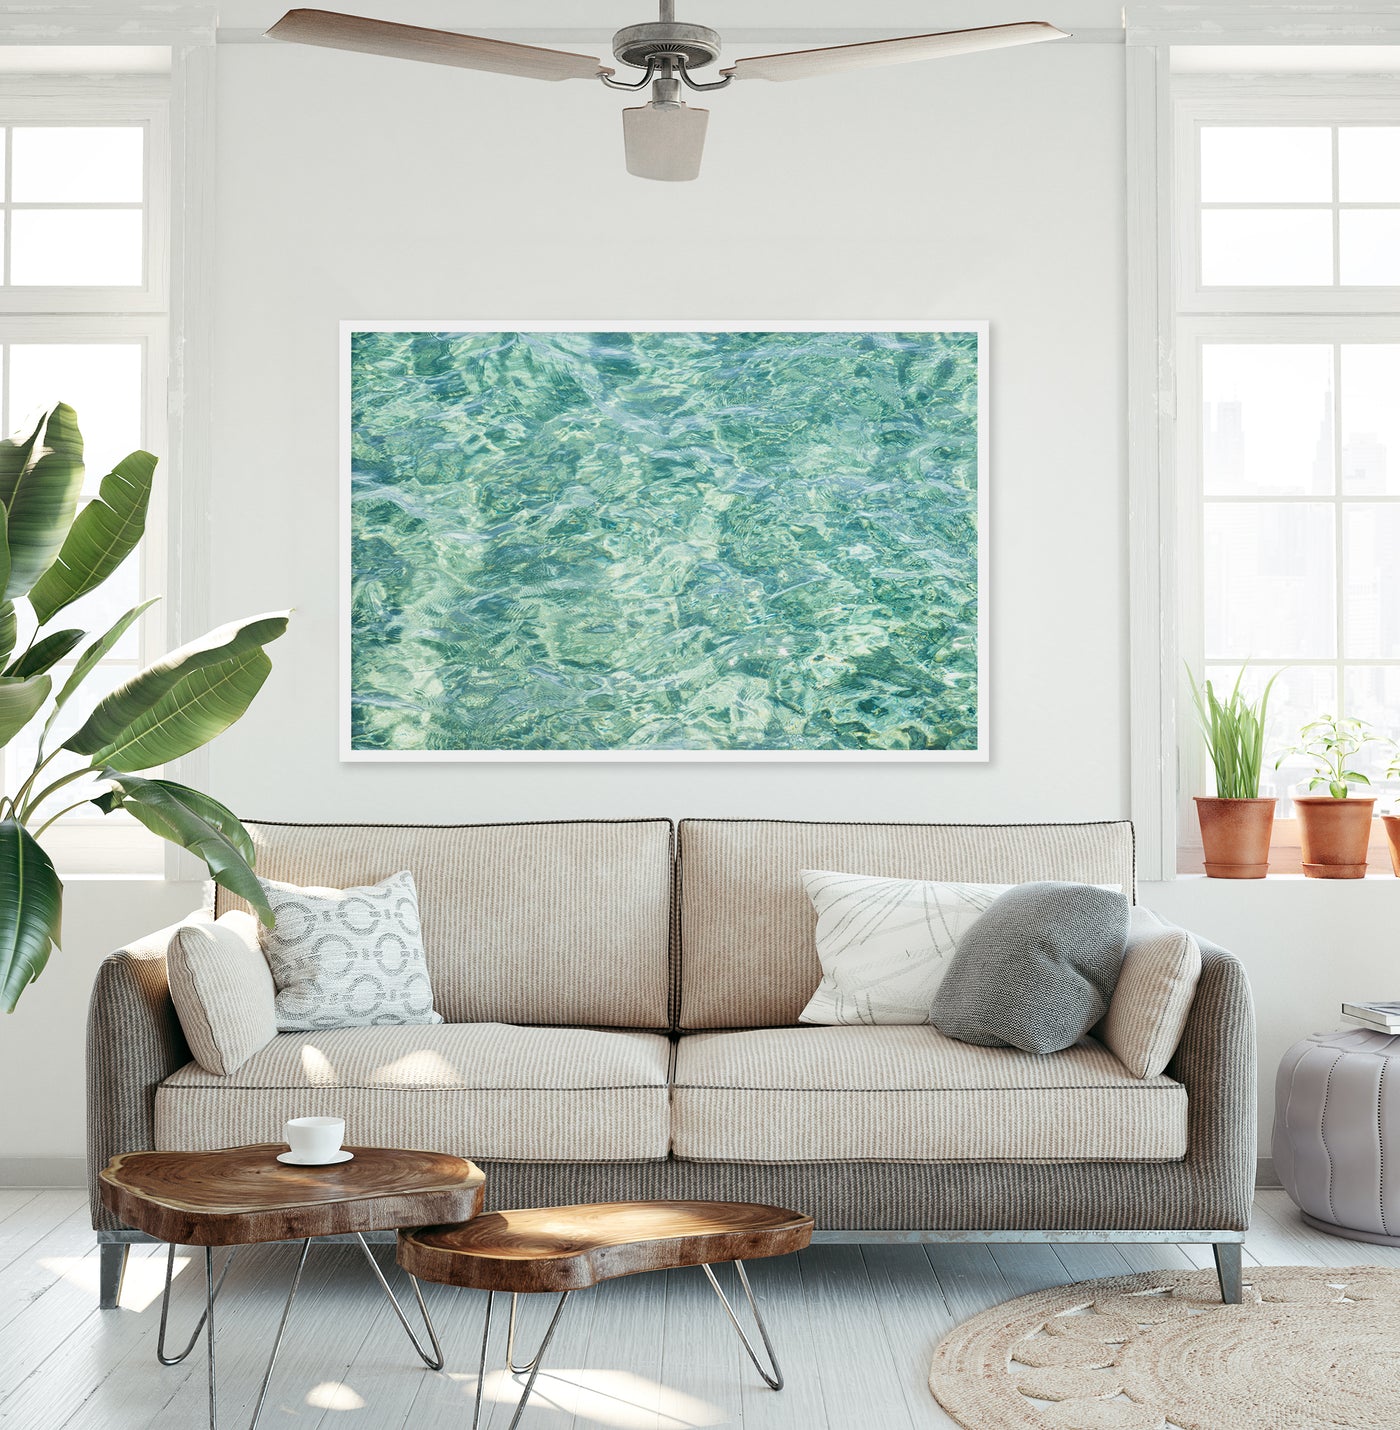 Large framed green abstract art print by Cattie Coyle Photography above couch in modern beach house living room